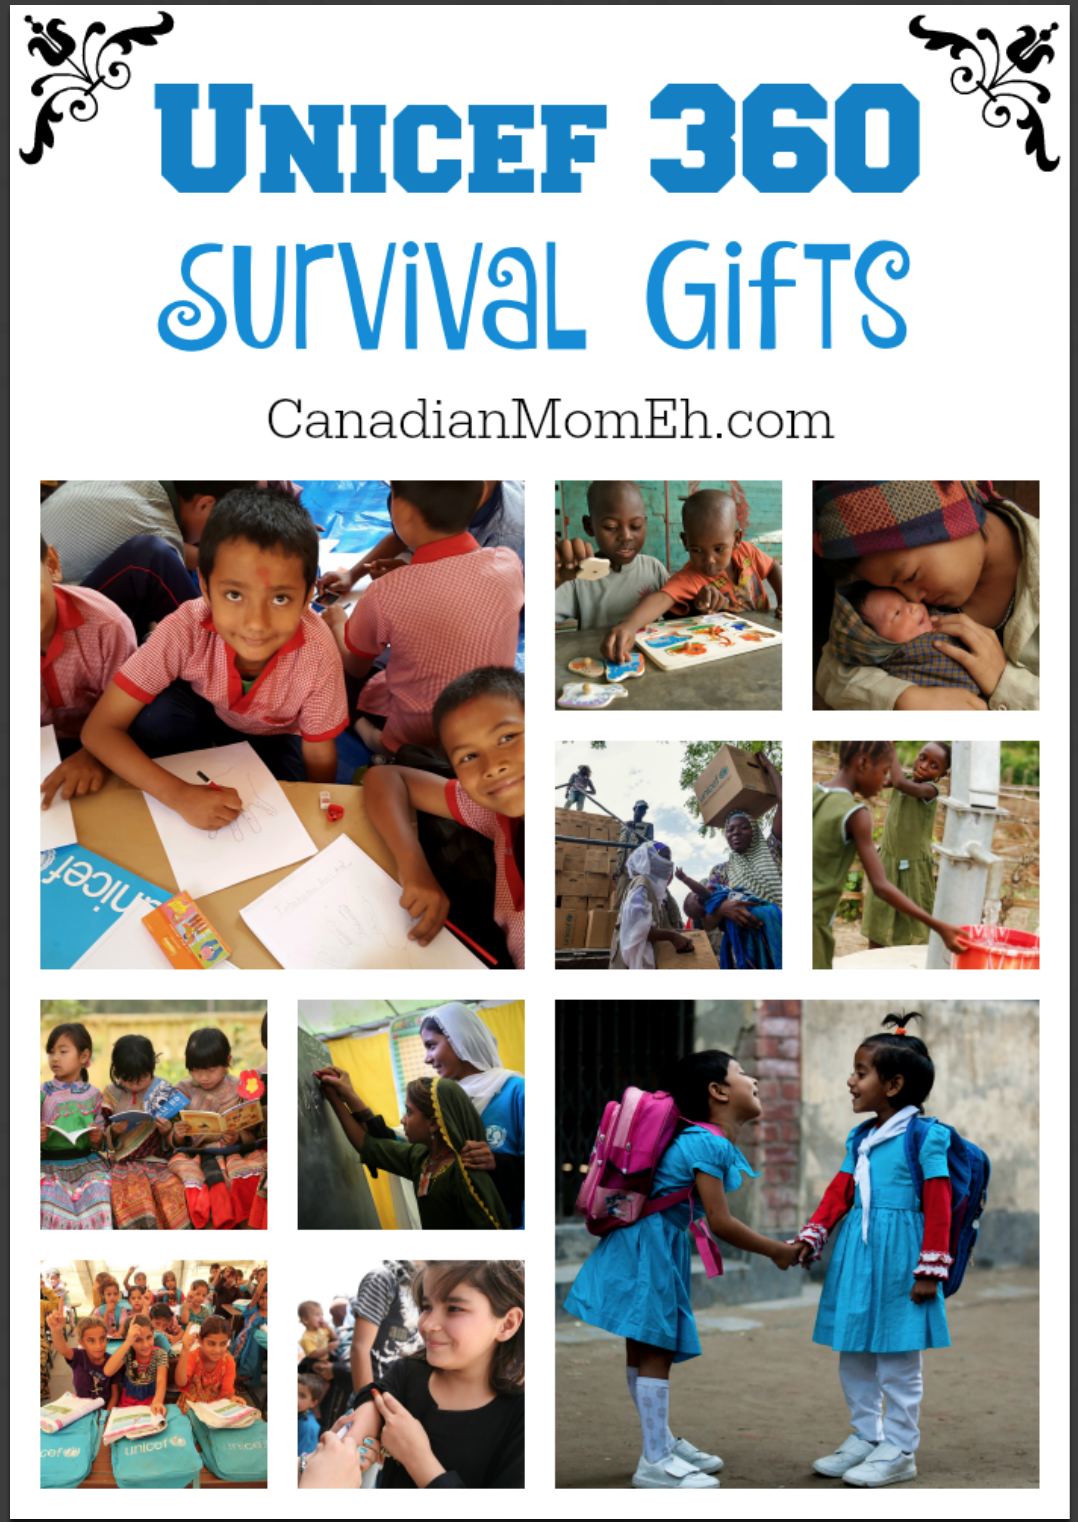 unicef, unicef 360, survival gifts, vr technology, VR viewer, clouds over sidra, canadianmomeh